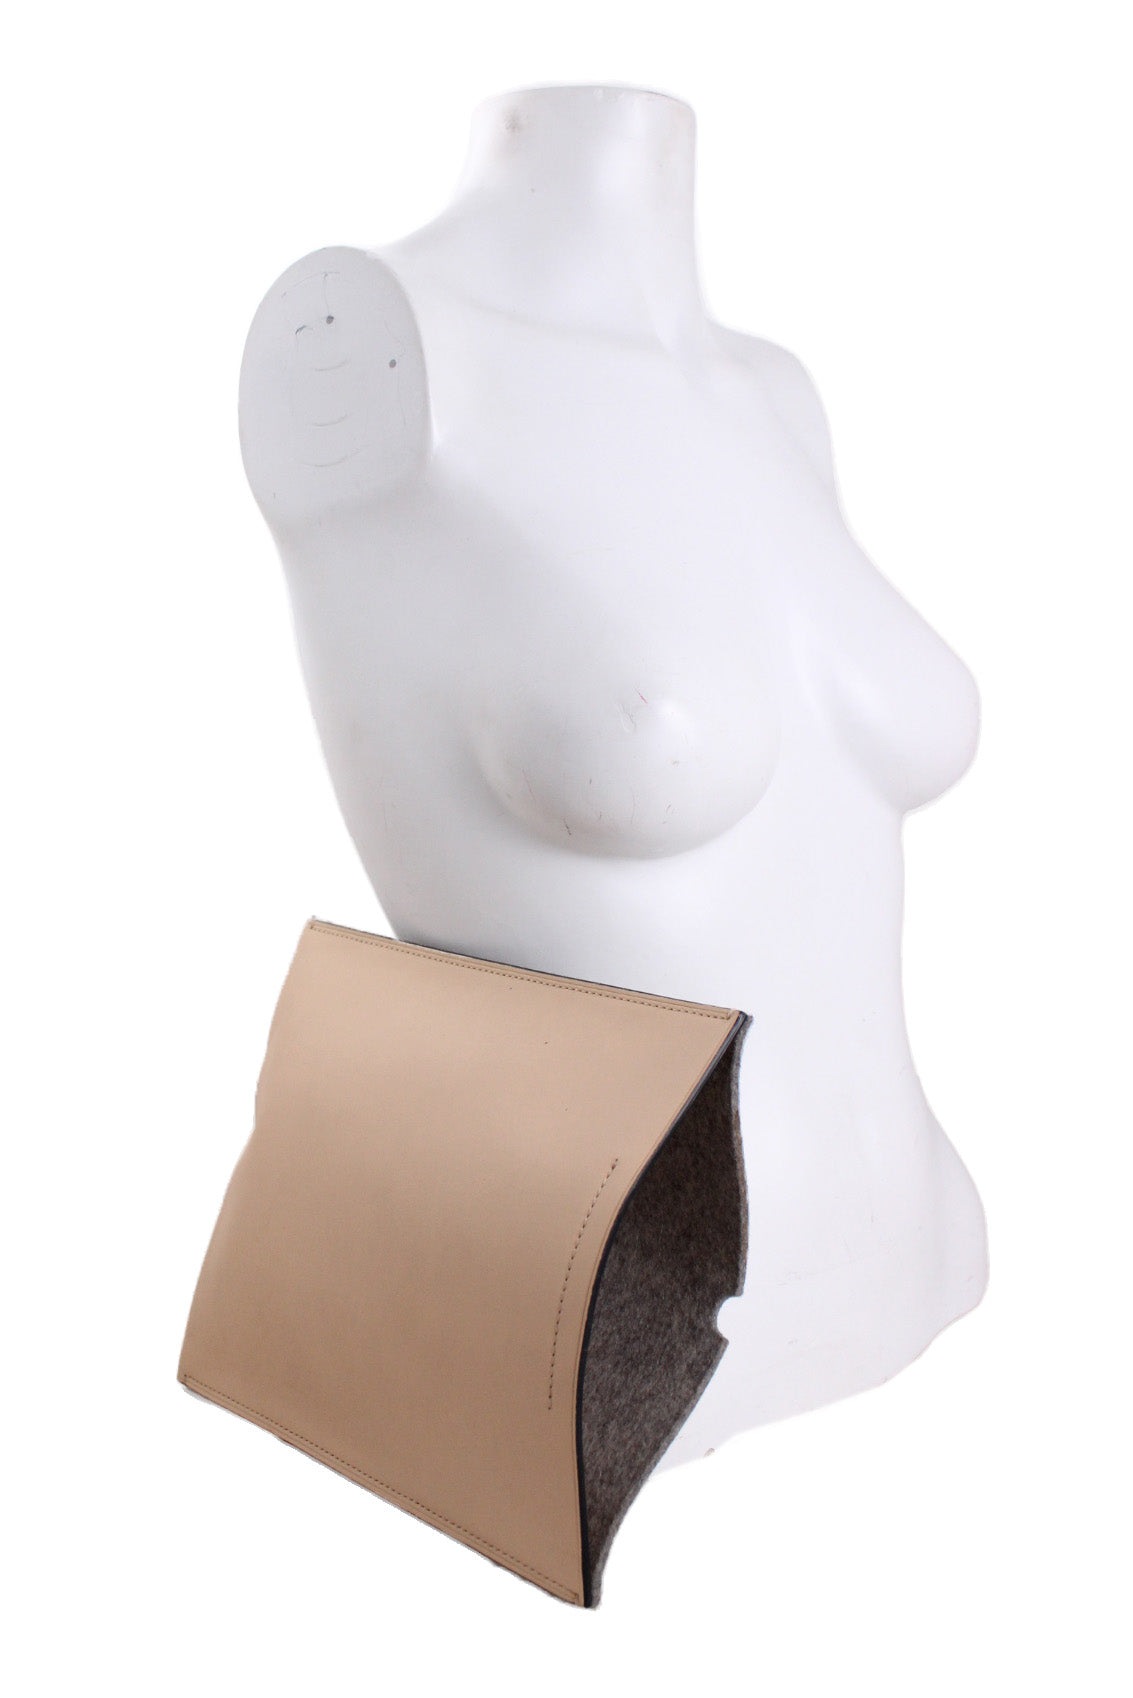 profile angle of bag positioned at side of mannequin torso.